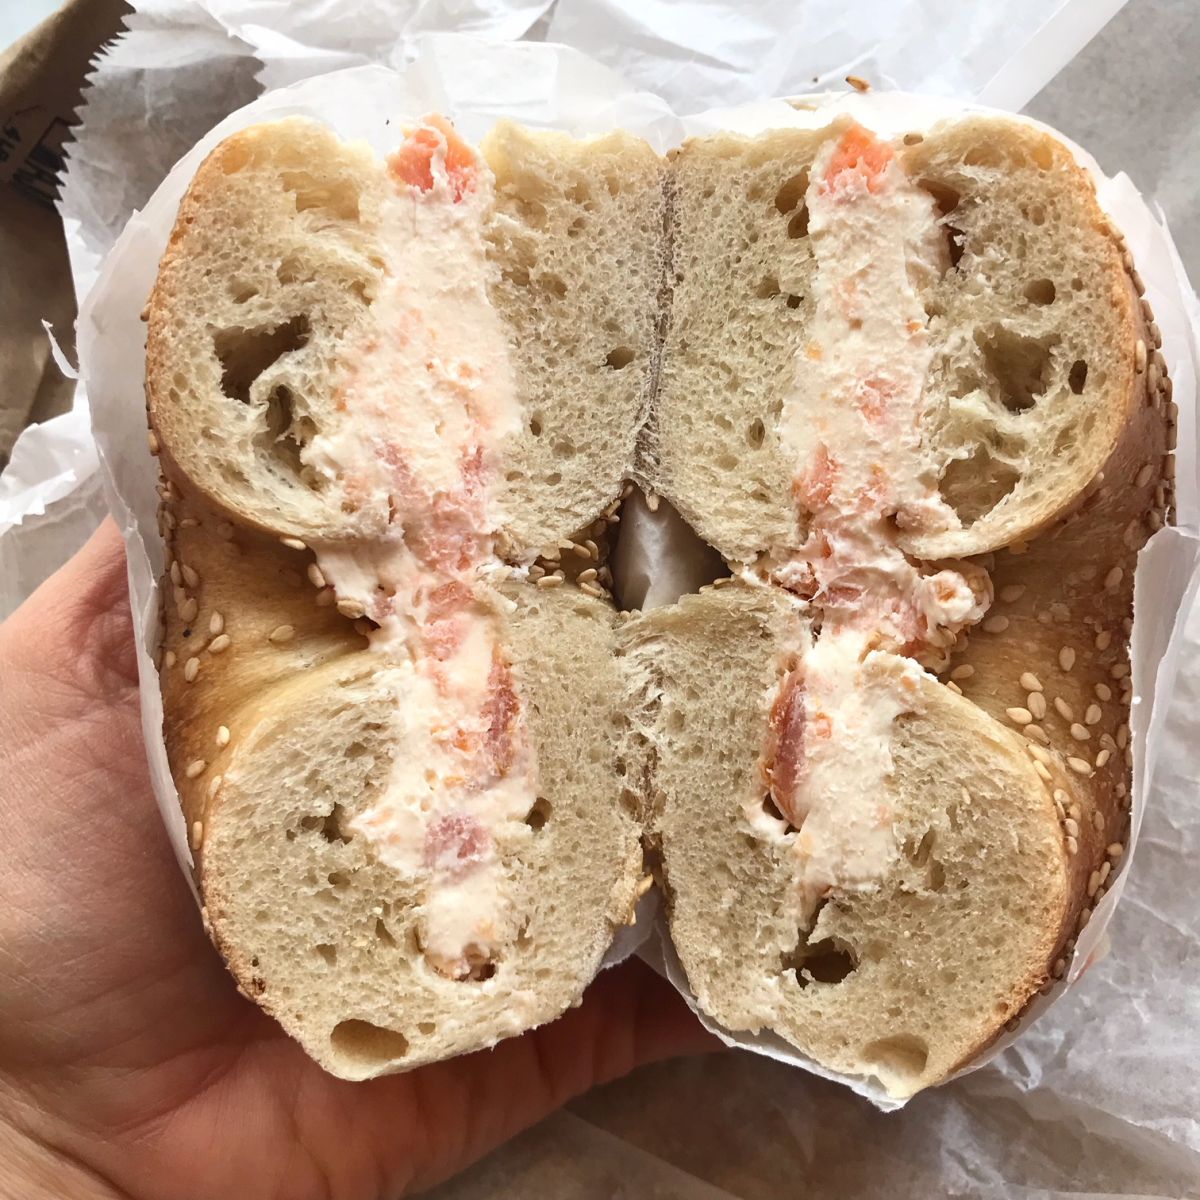 A NYC bagel with lox cream cheese.